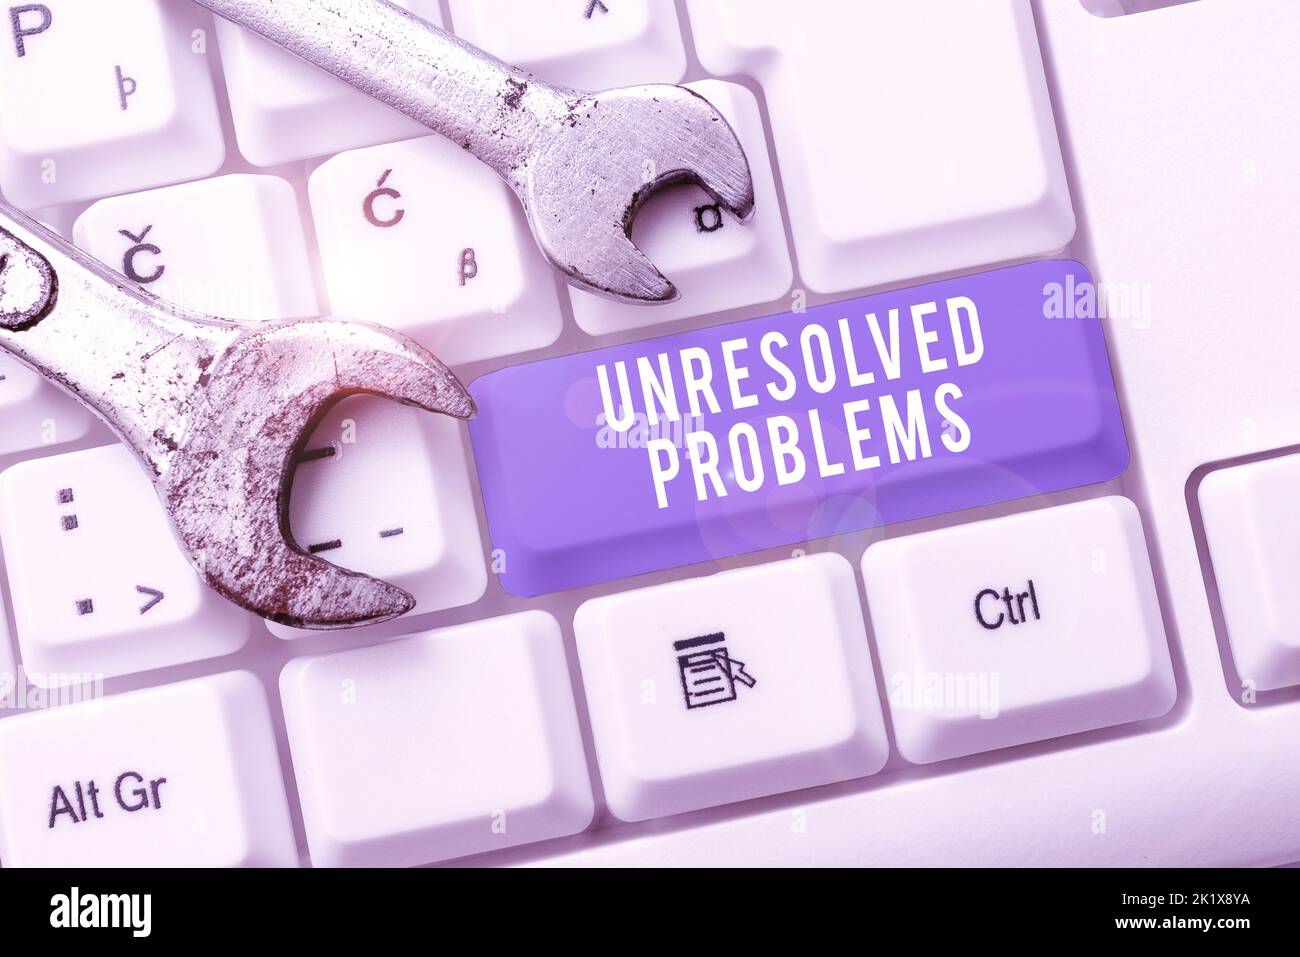 Text sign showing Unresolved Problems. Internet Concept those Queries no one can answer Unanswerable Questions Stock Photo